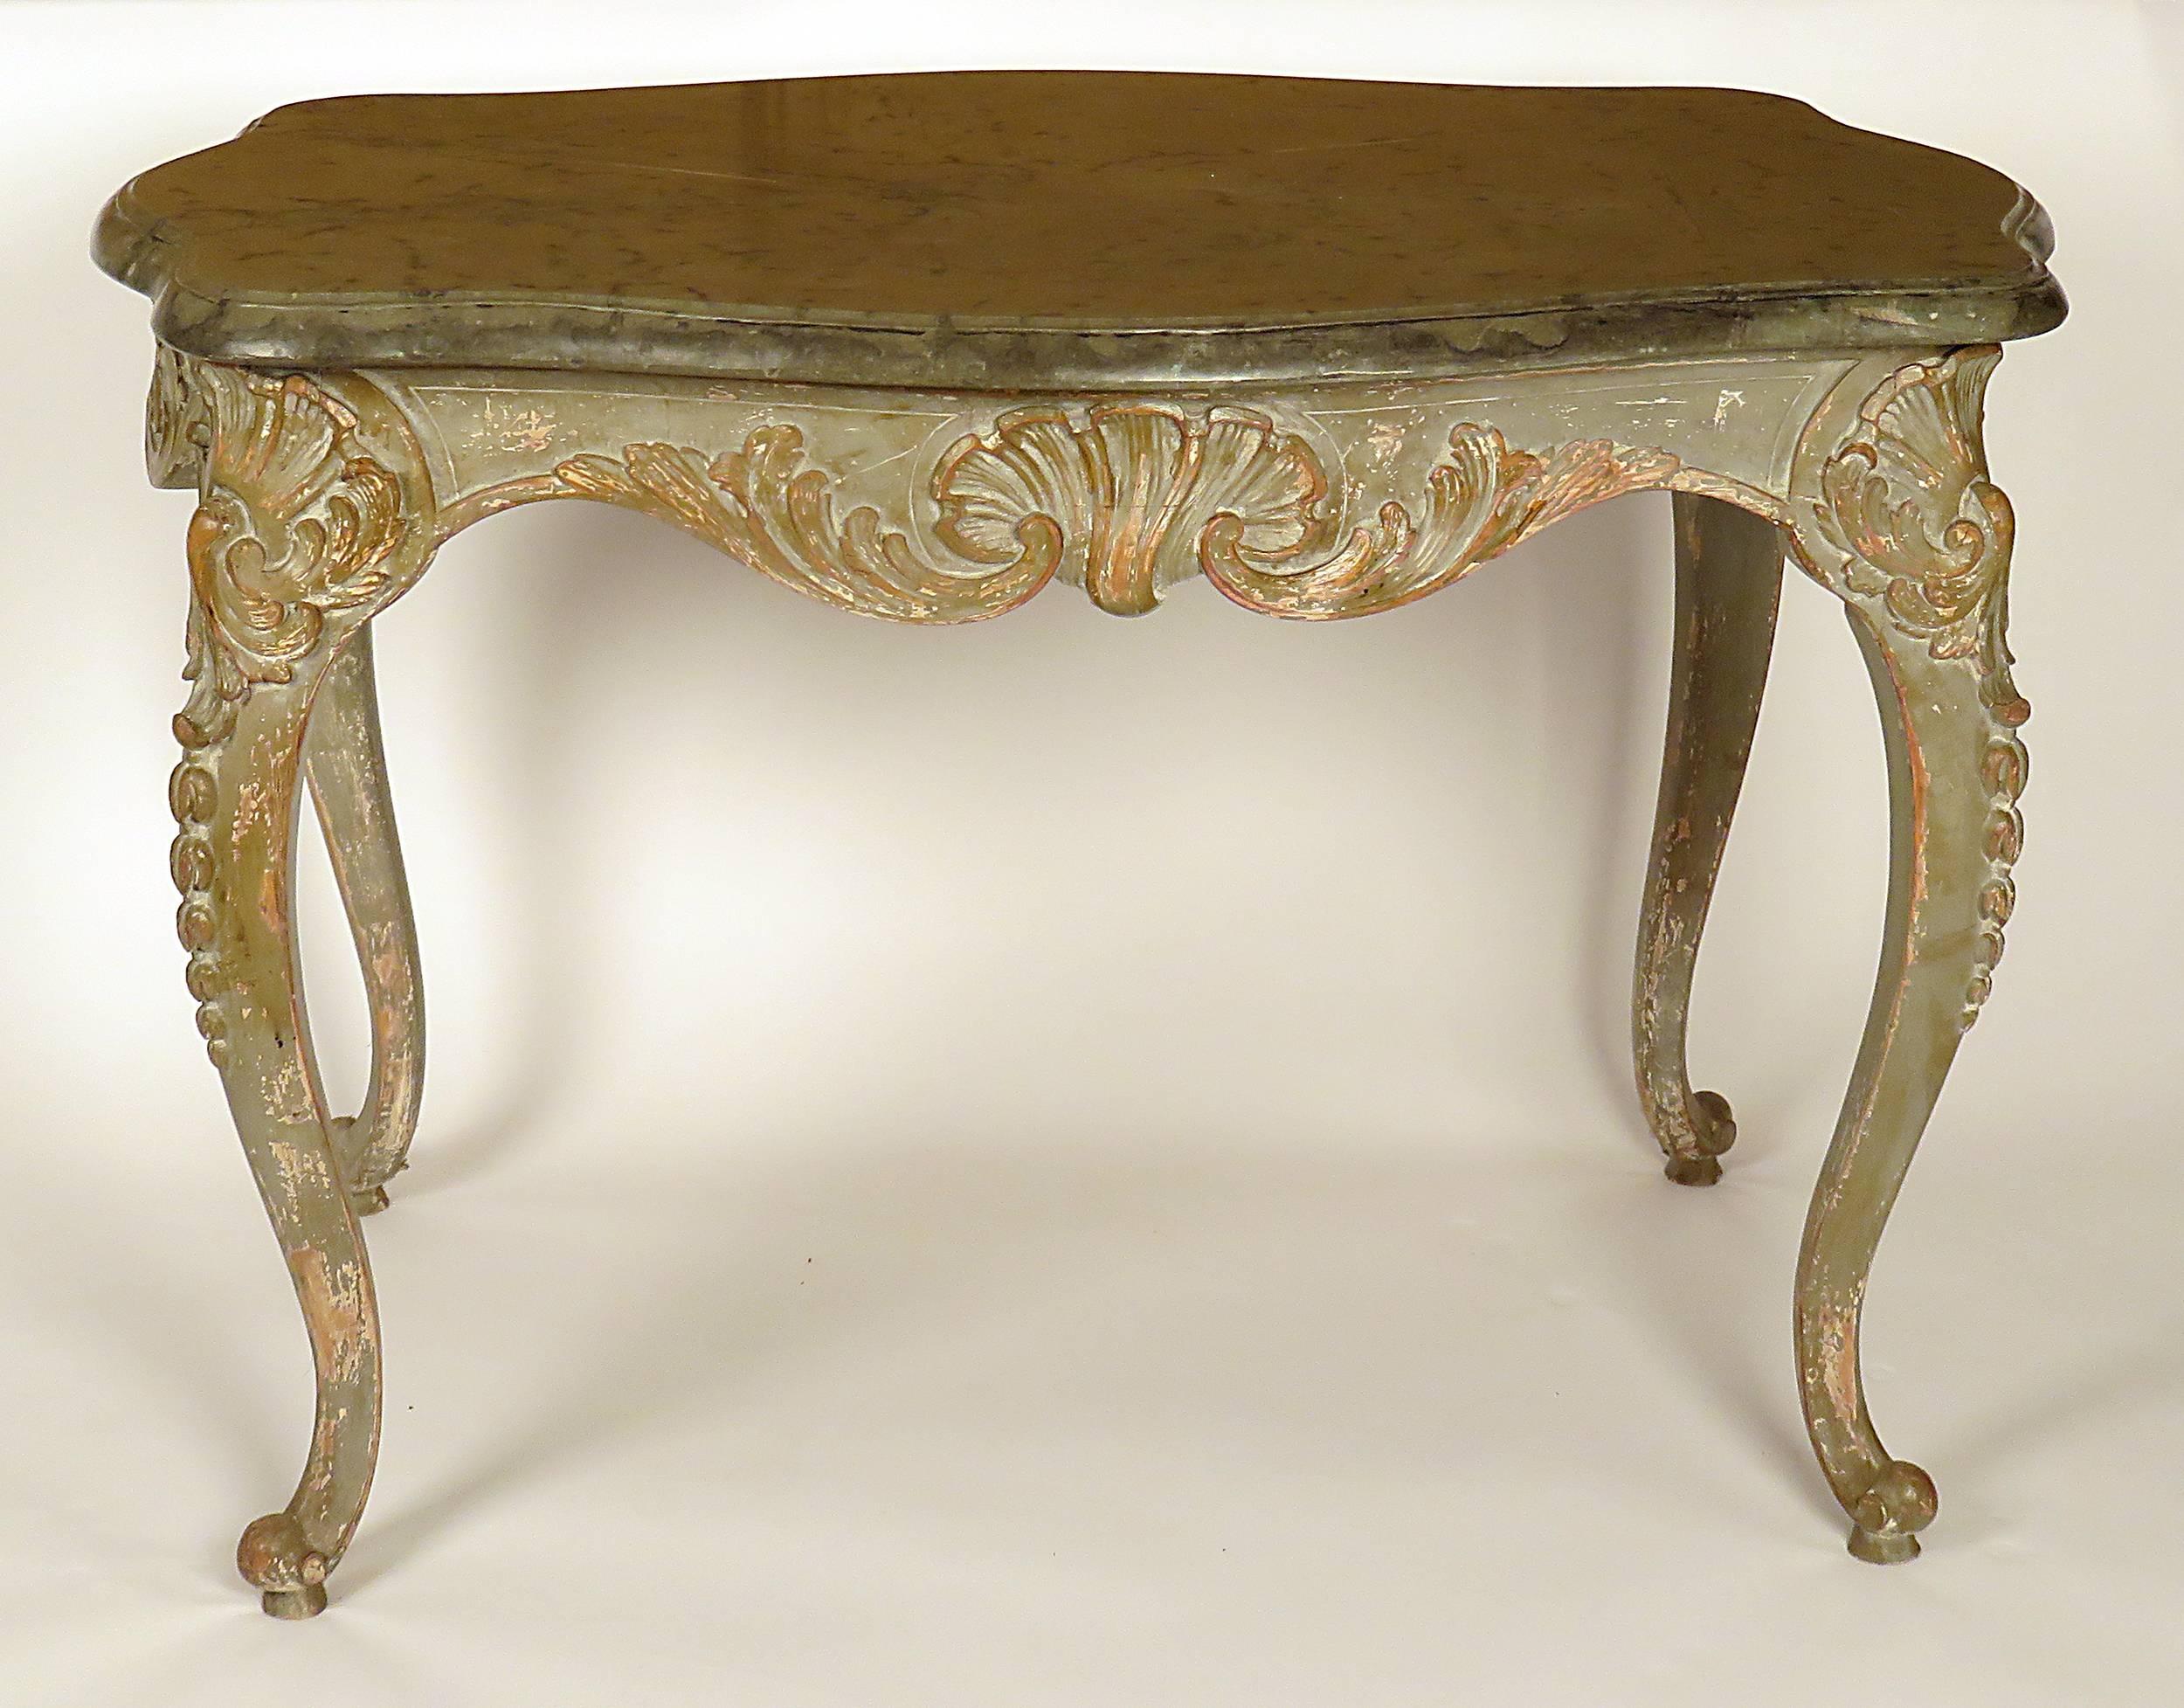 A nice Swedish Rococo table with original fossil marble top. Made to stand away from wall with carvings on four sides. Good older painted finish. With original marble.